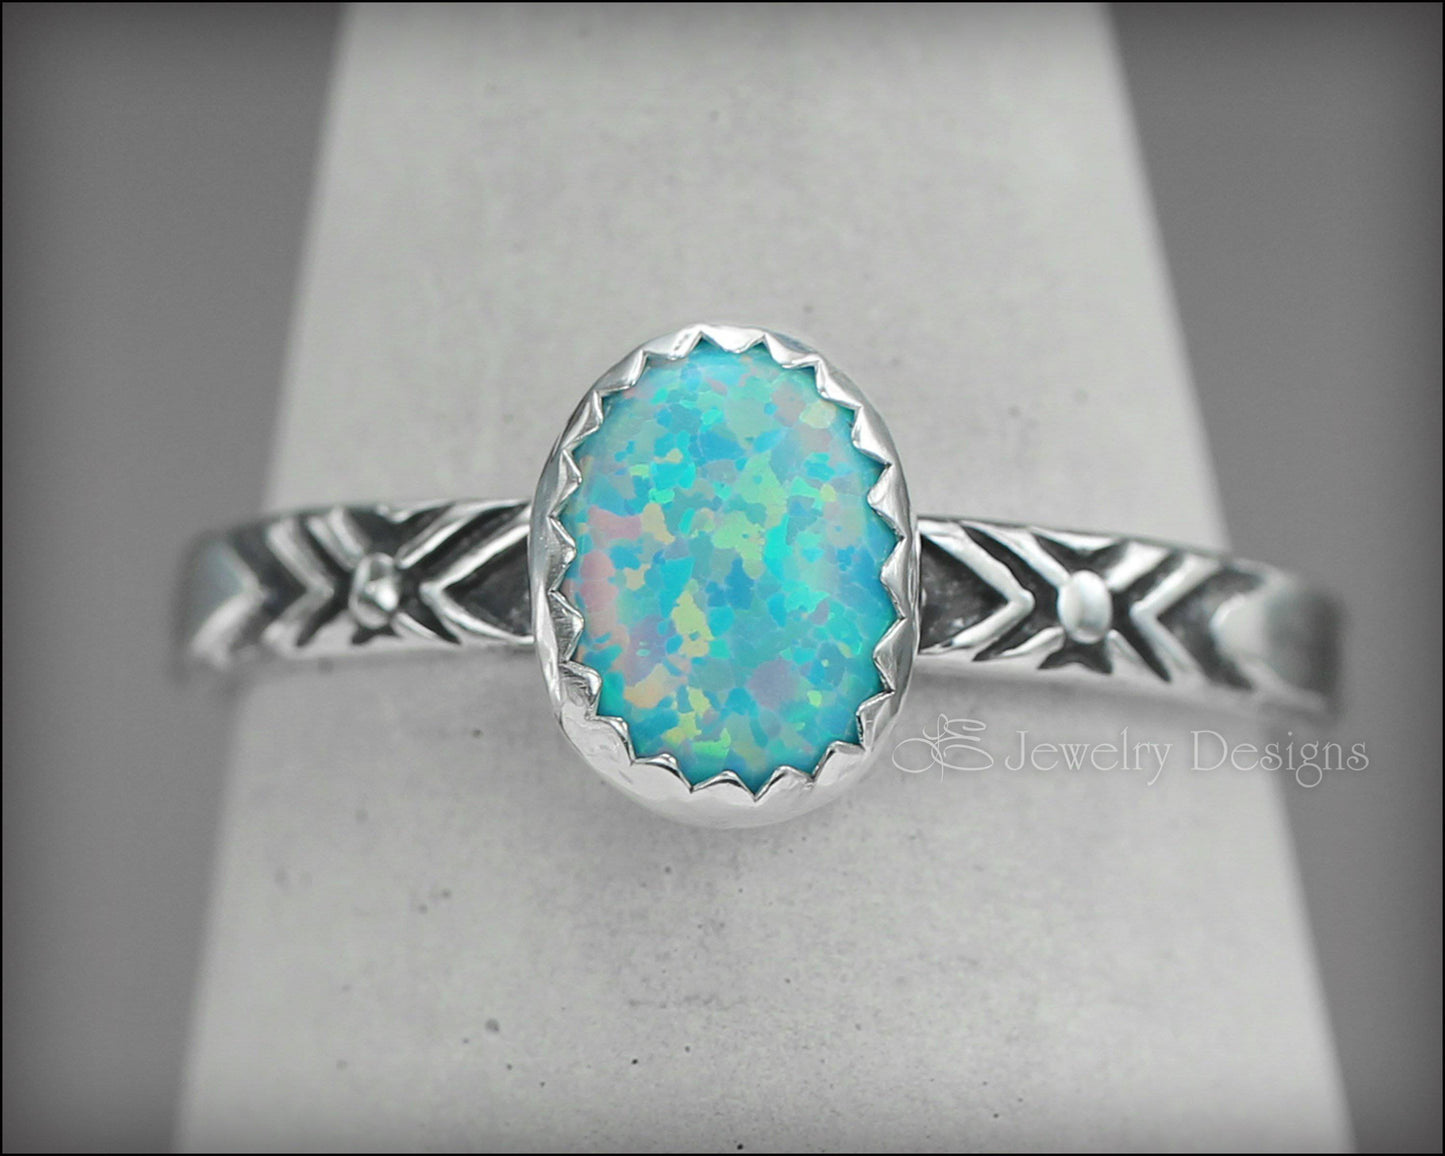 Load image into Gallery viewer, Oval Opal Pattern Ring - (choose color) - LE Jewelry Designs
